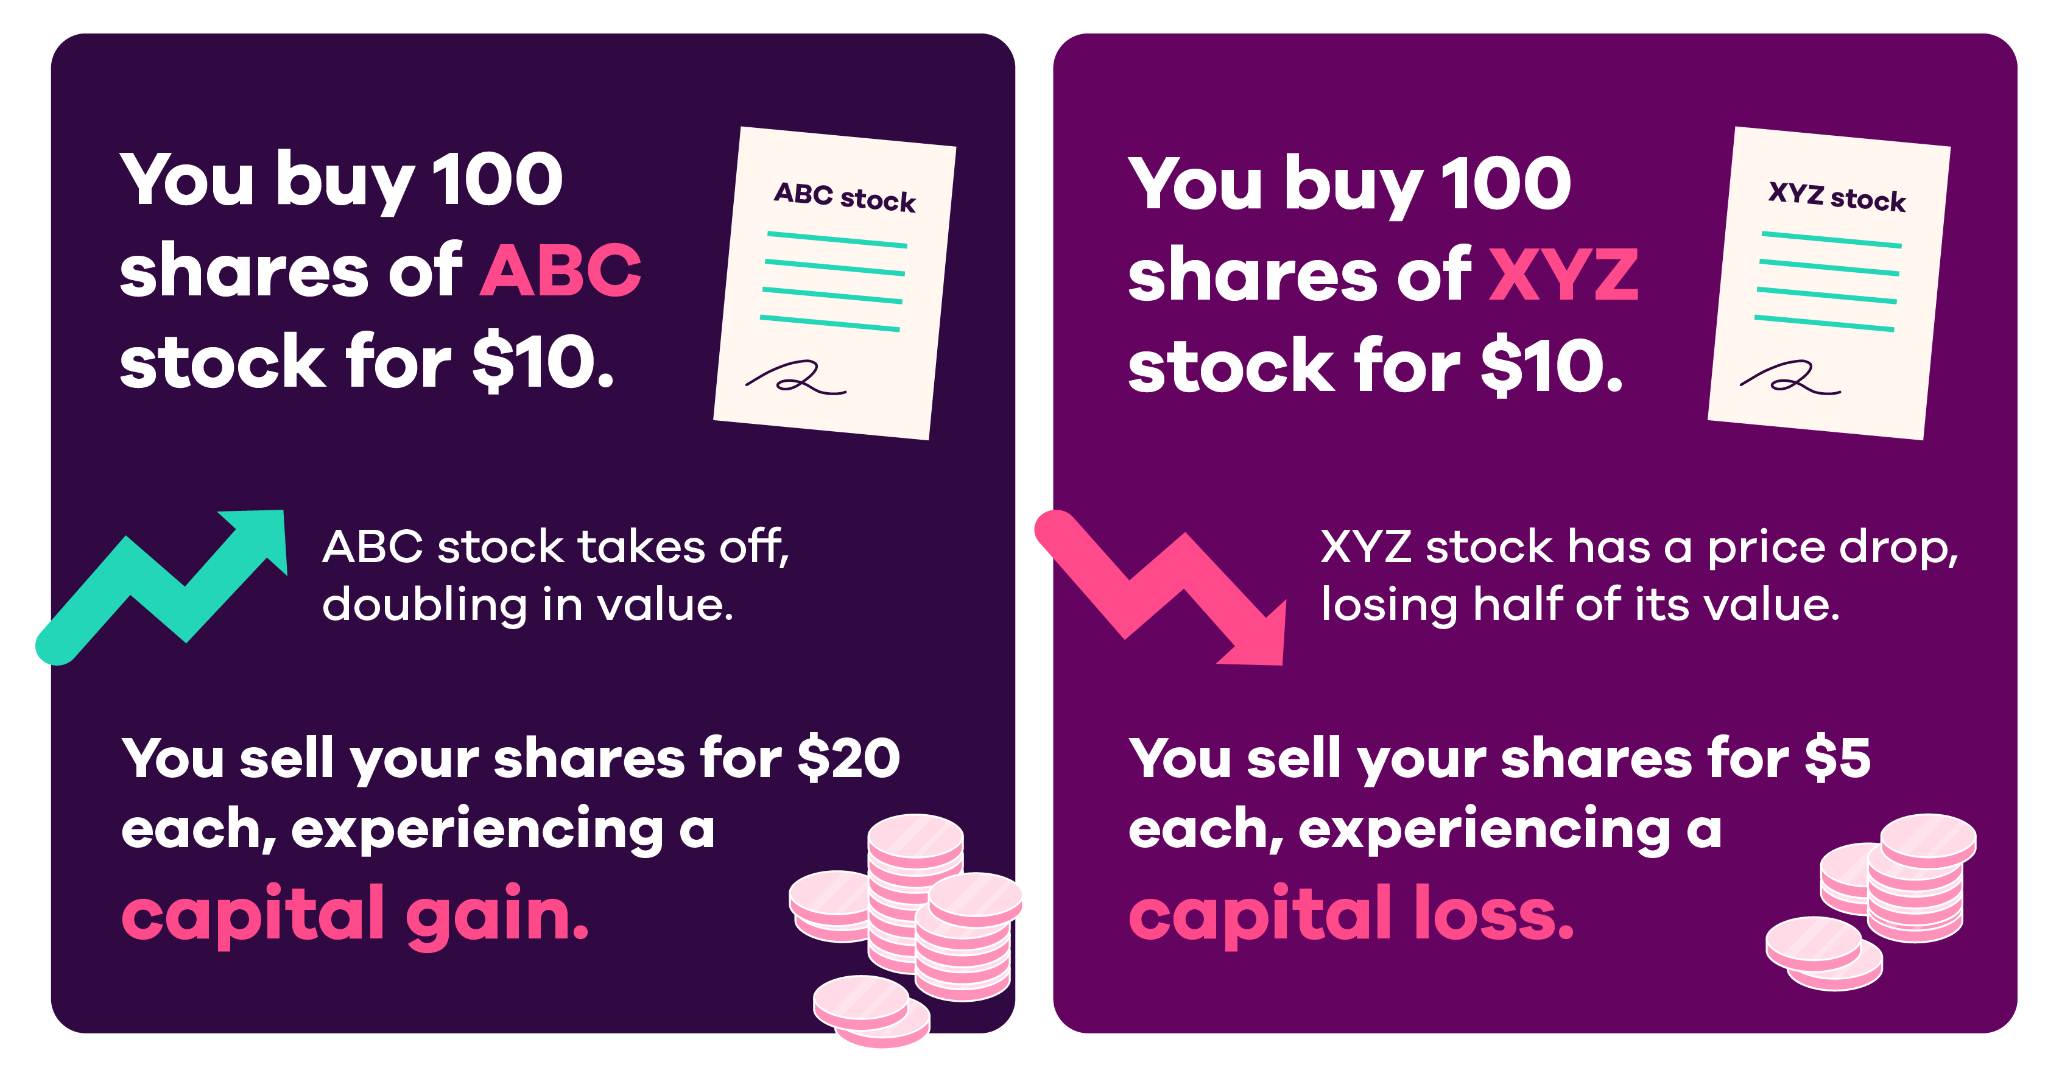 Visual example of capital gain vs. capital loss. Capital gain: You buy 10 shares of ABC stock for $10. ABC stock takes off, doubling in value. You sell your shares for $20 each, experiencing a capital game. Capital loss: You buy 100 shares of XYZ stock for $10. XYZ stock has a price drop, losing half of its value. You sell your shares for $5 each, experiencing a capital loss.